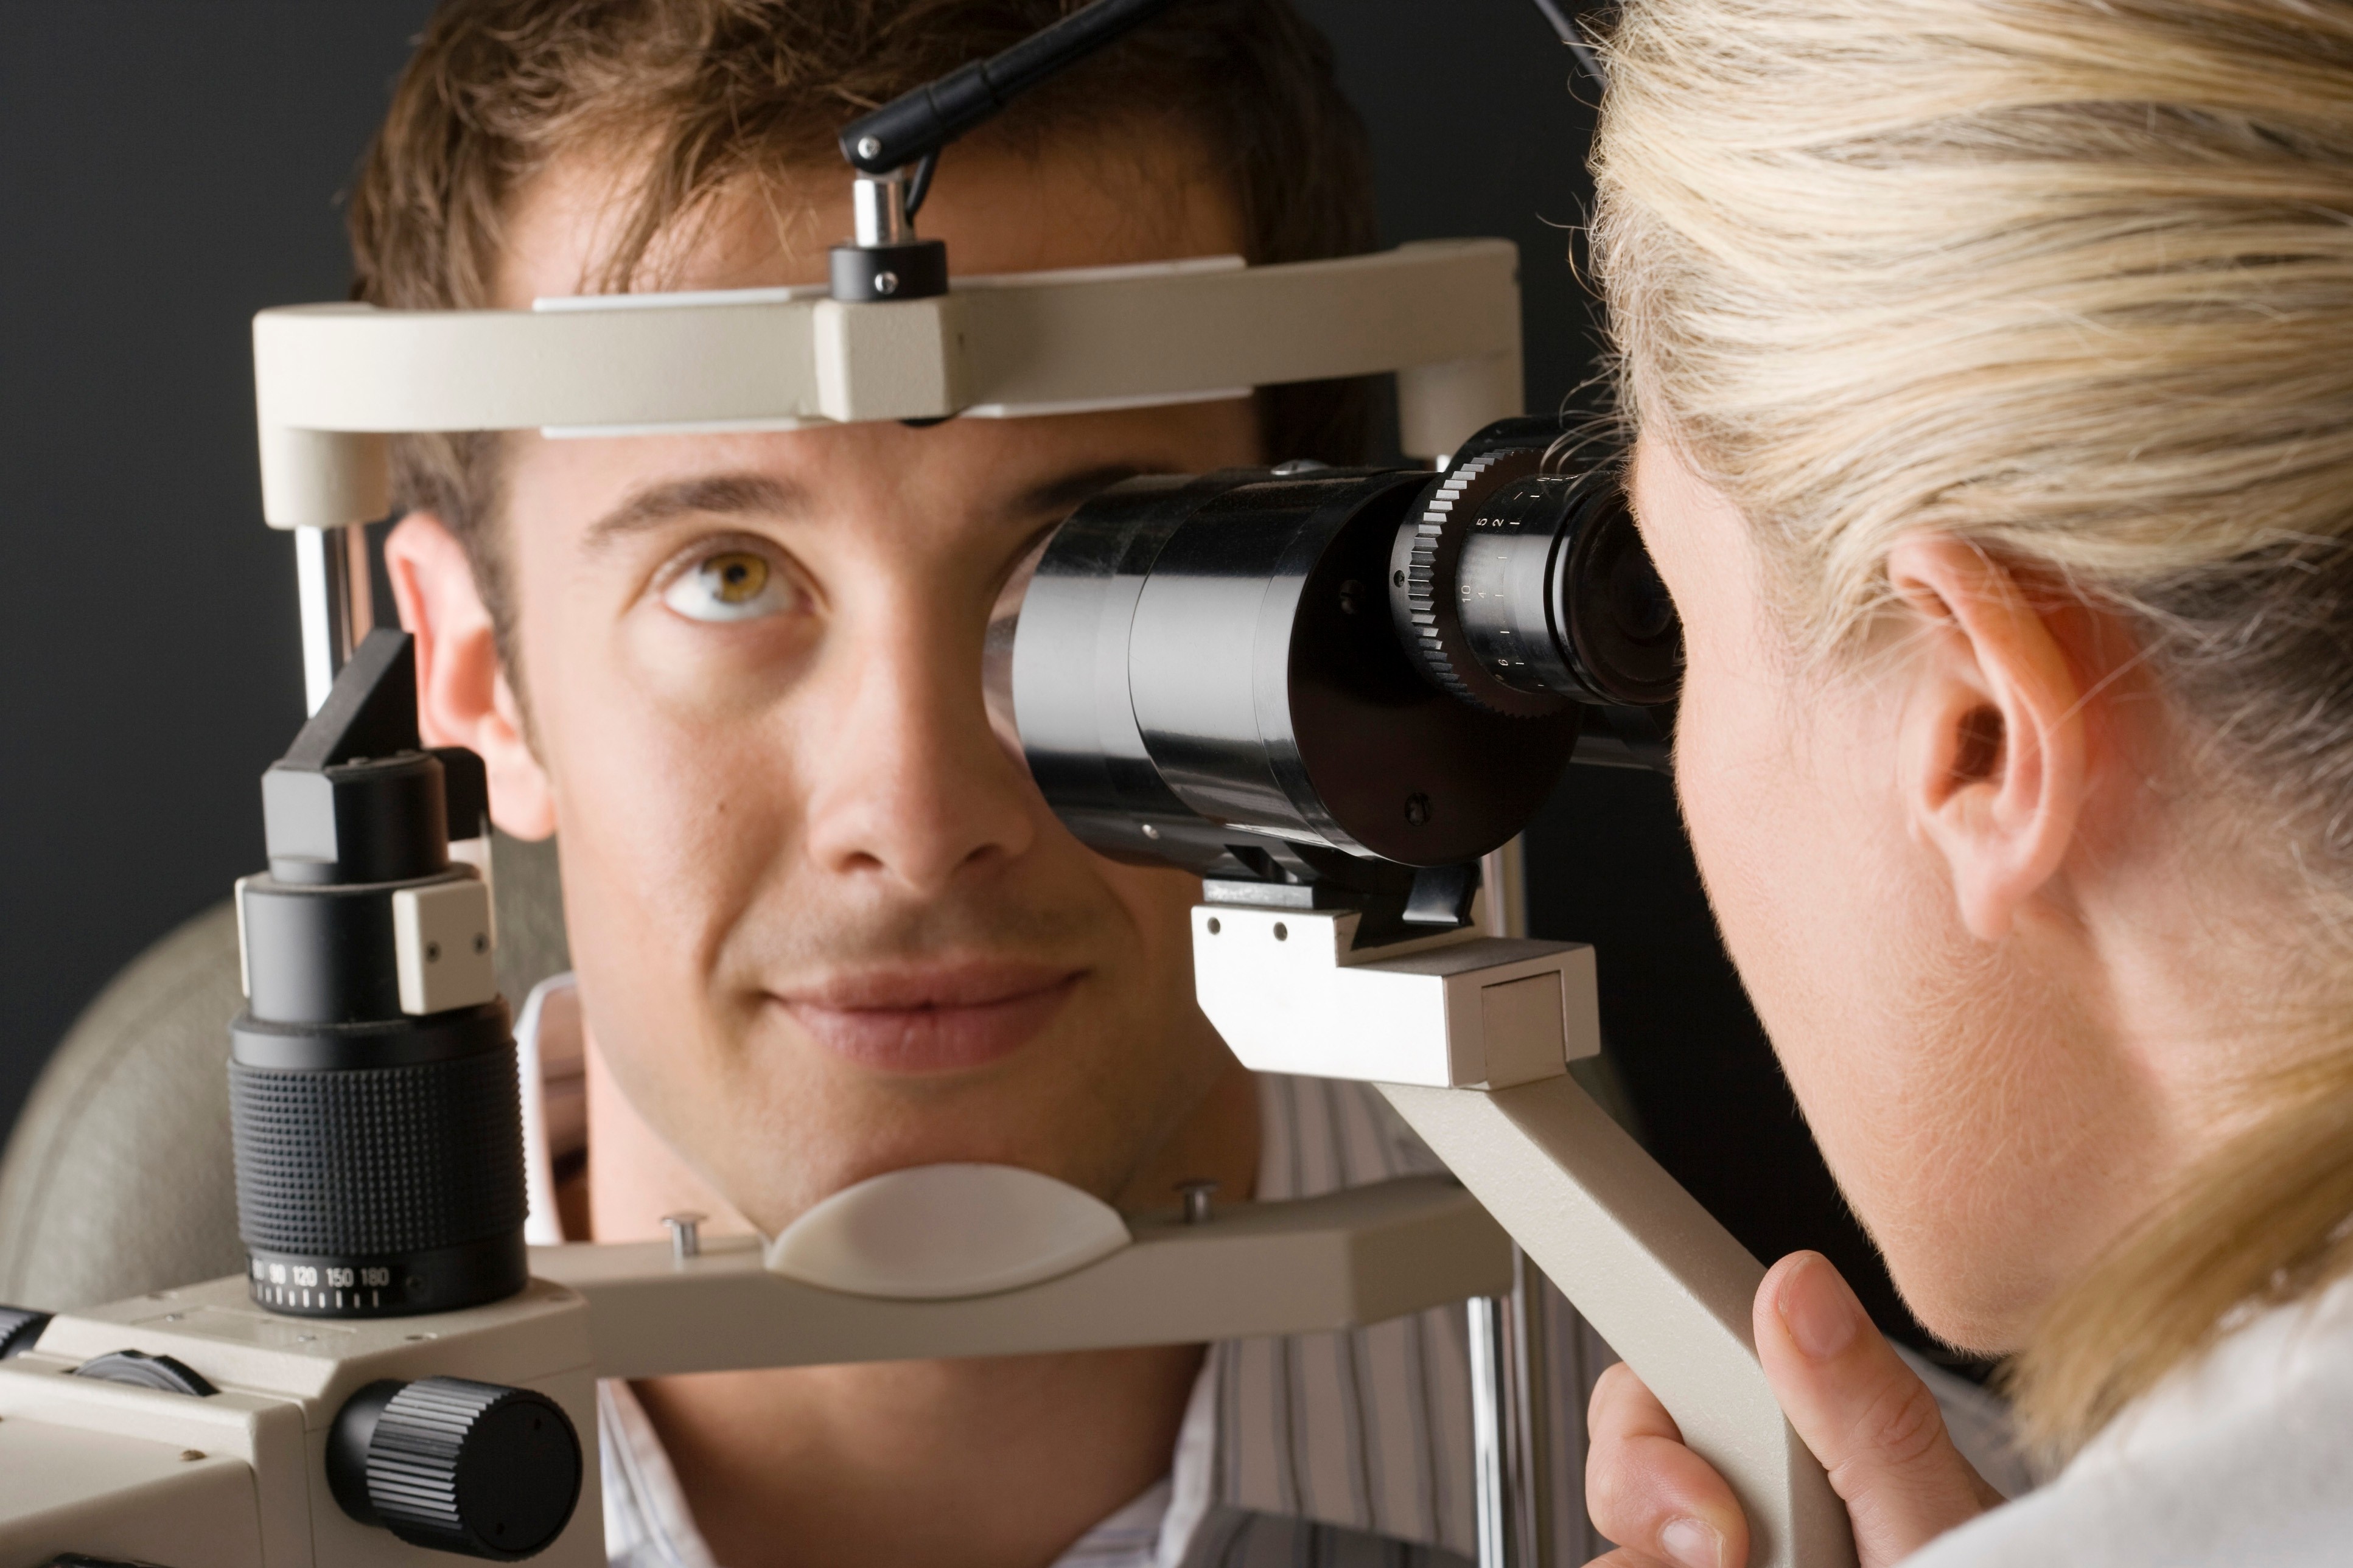 Northern Irish Over 45 Shun Eye Tests Which Could Protect their Driving Licence and Vision 